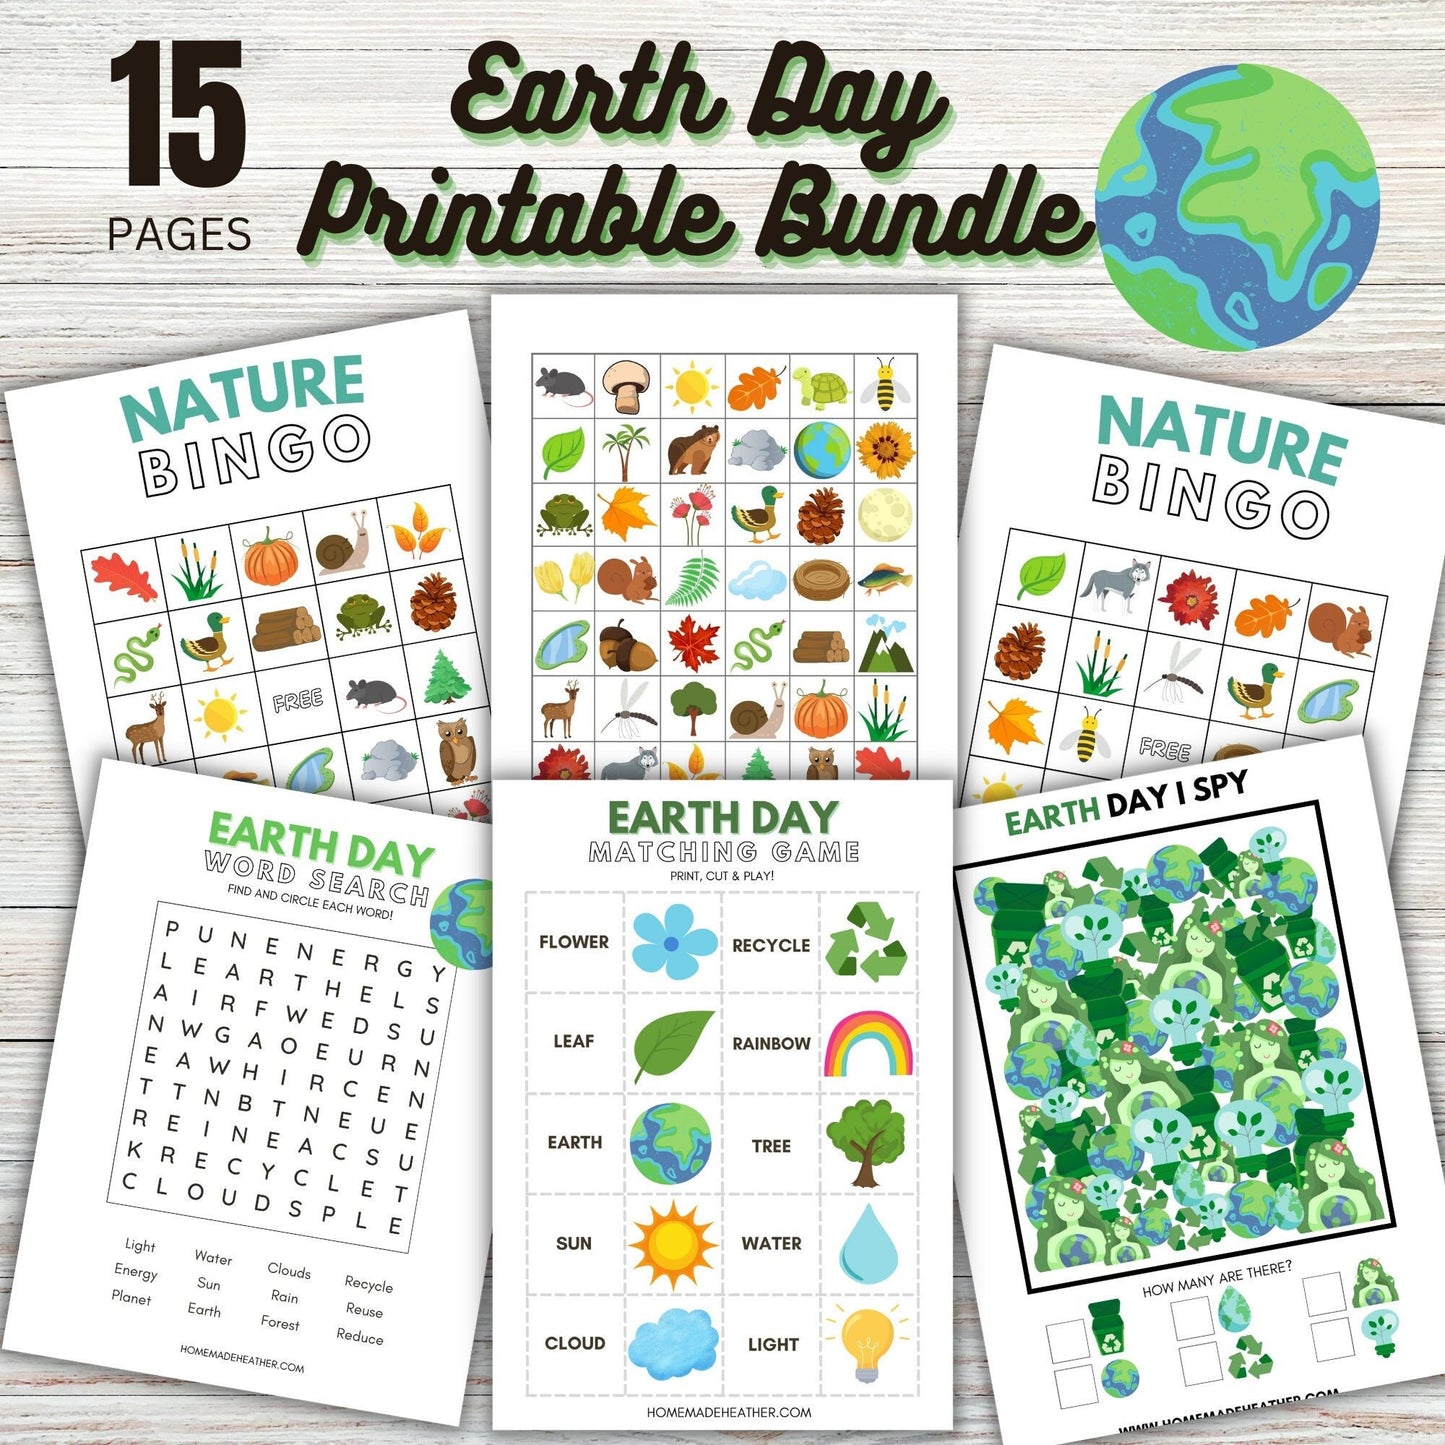 Earth Day Printable Activity Bundle - Earth Day Printable PDF - Instant Download